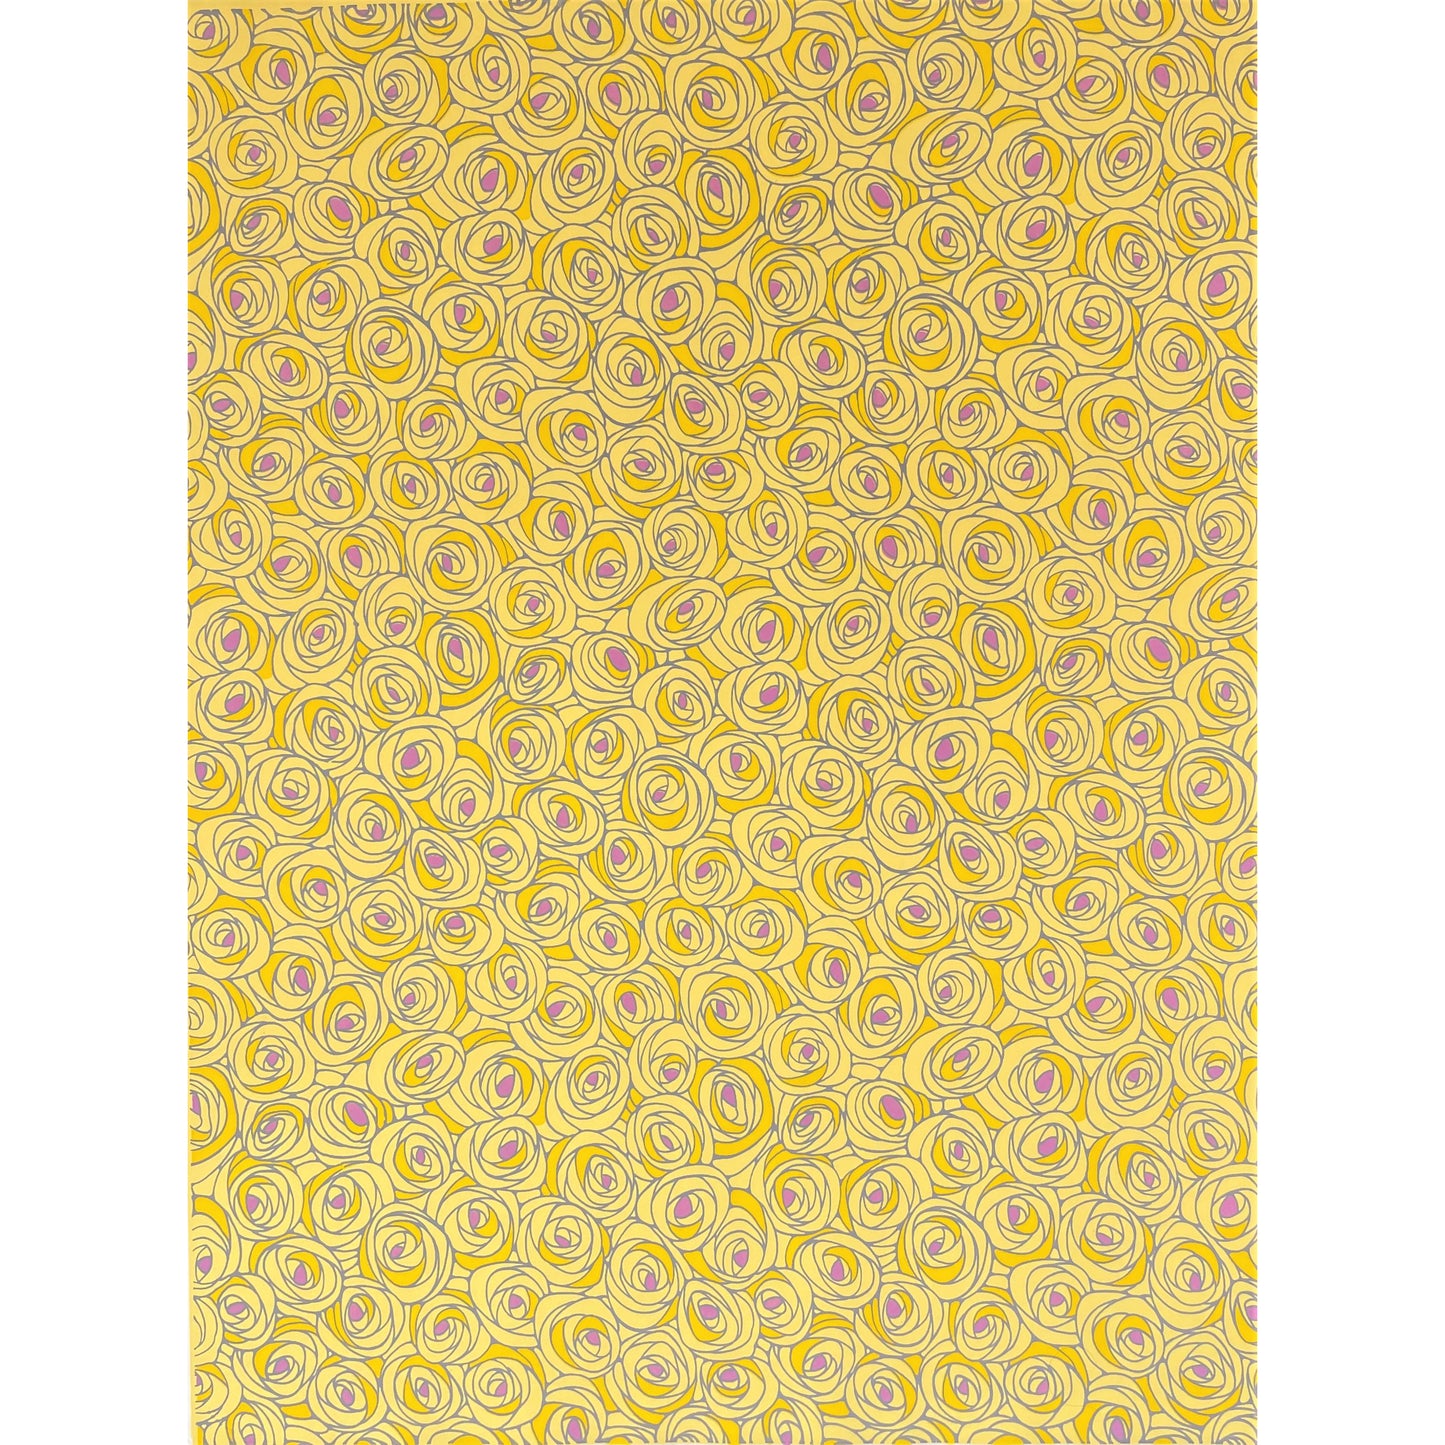 japanese silk-screen handmade paper showing yellow and lilac abstract floral pattern, full sheet view